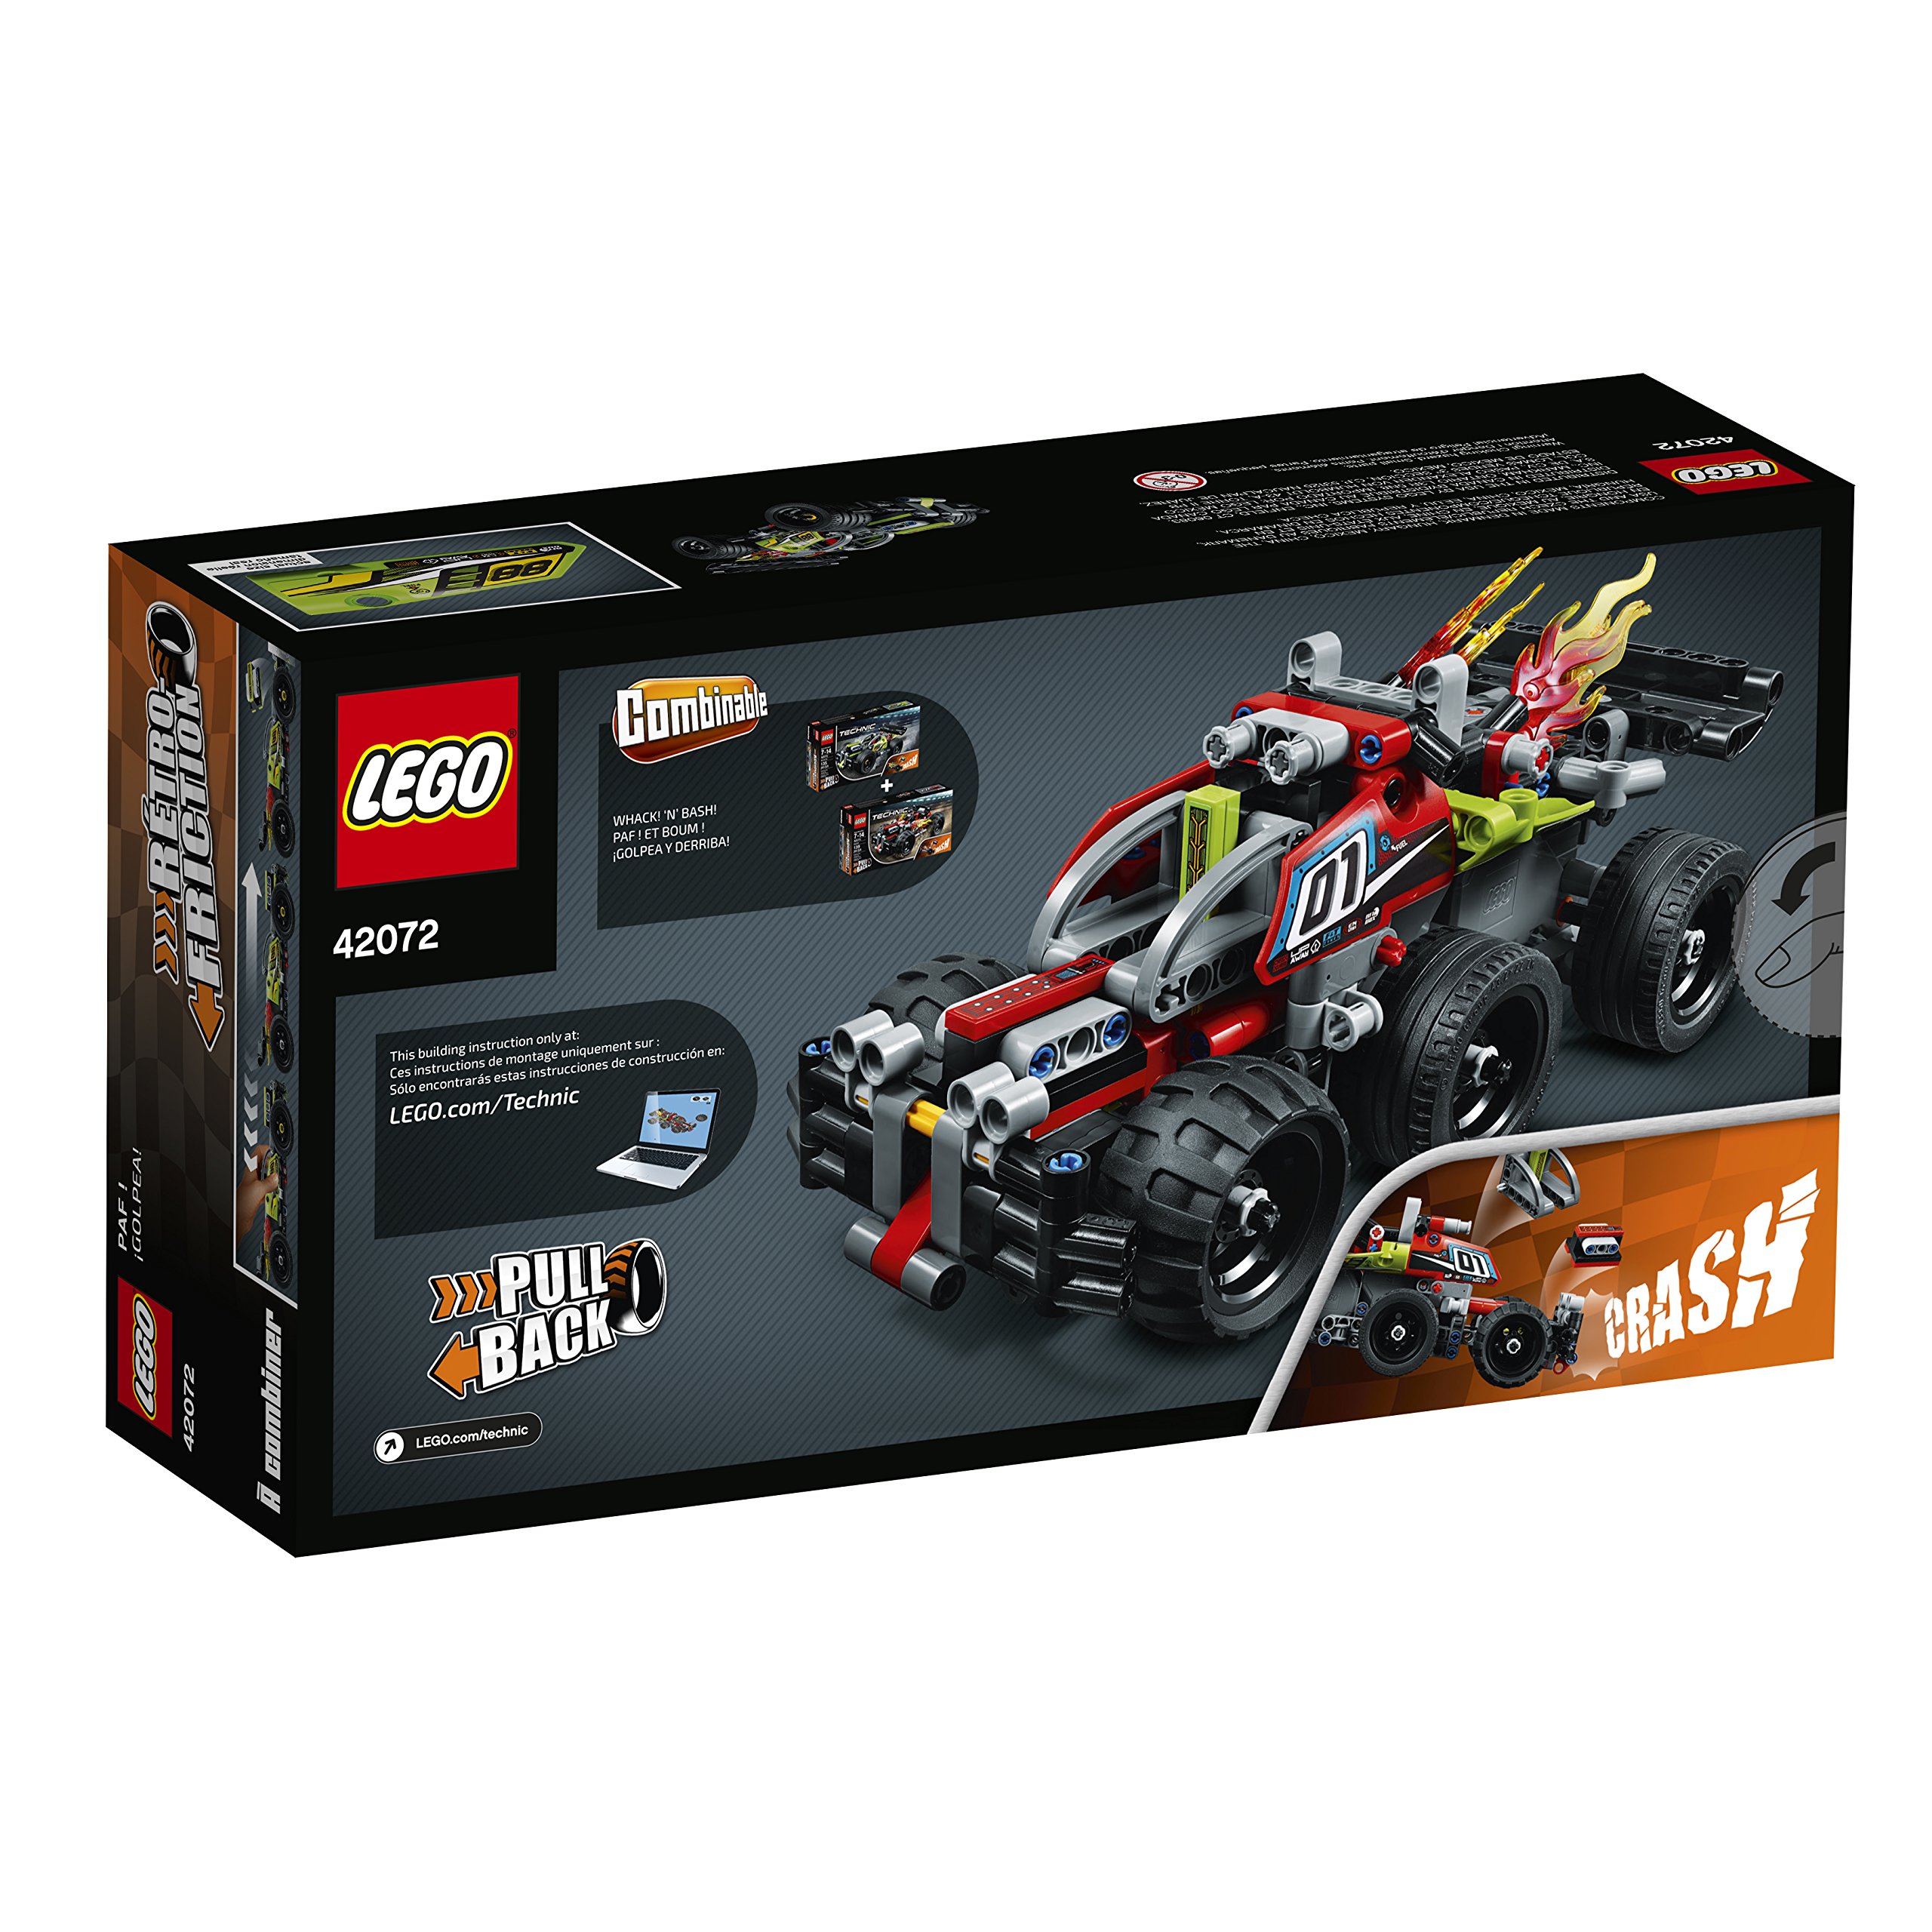 LEGO Technic WHACK! 42072 Building Kit with Pull Back Toy Stunt Car, Popular Girls and Boys Engineering Toy for Creative Play (135 Pieces)